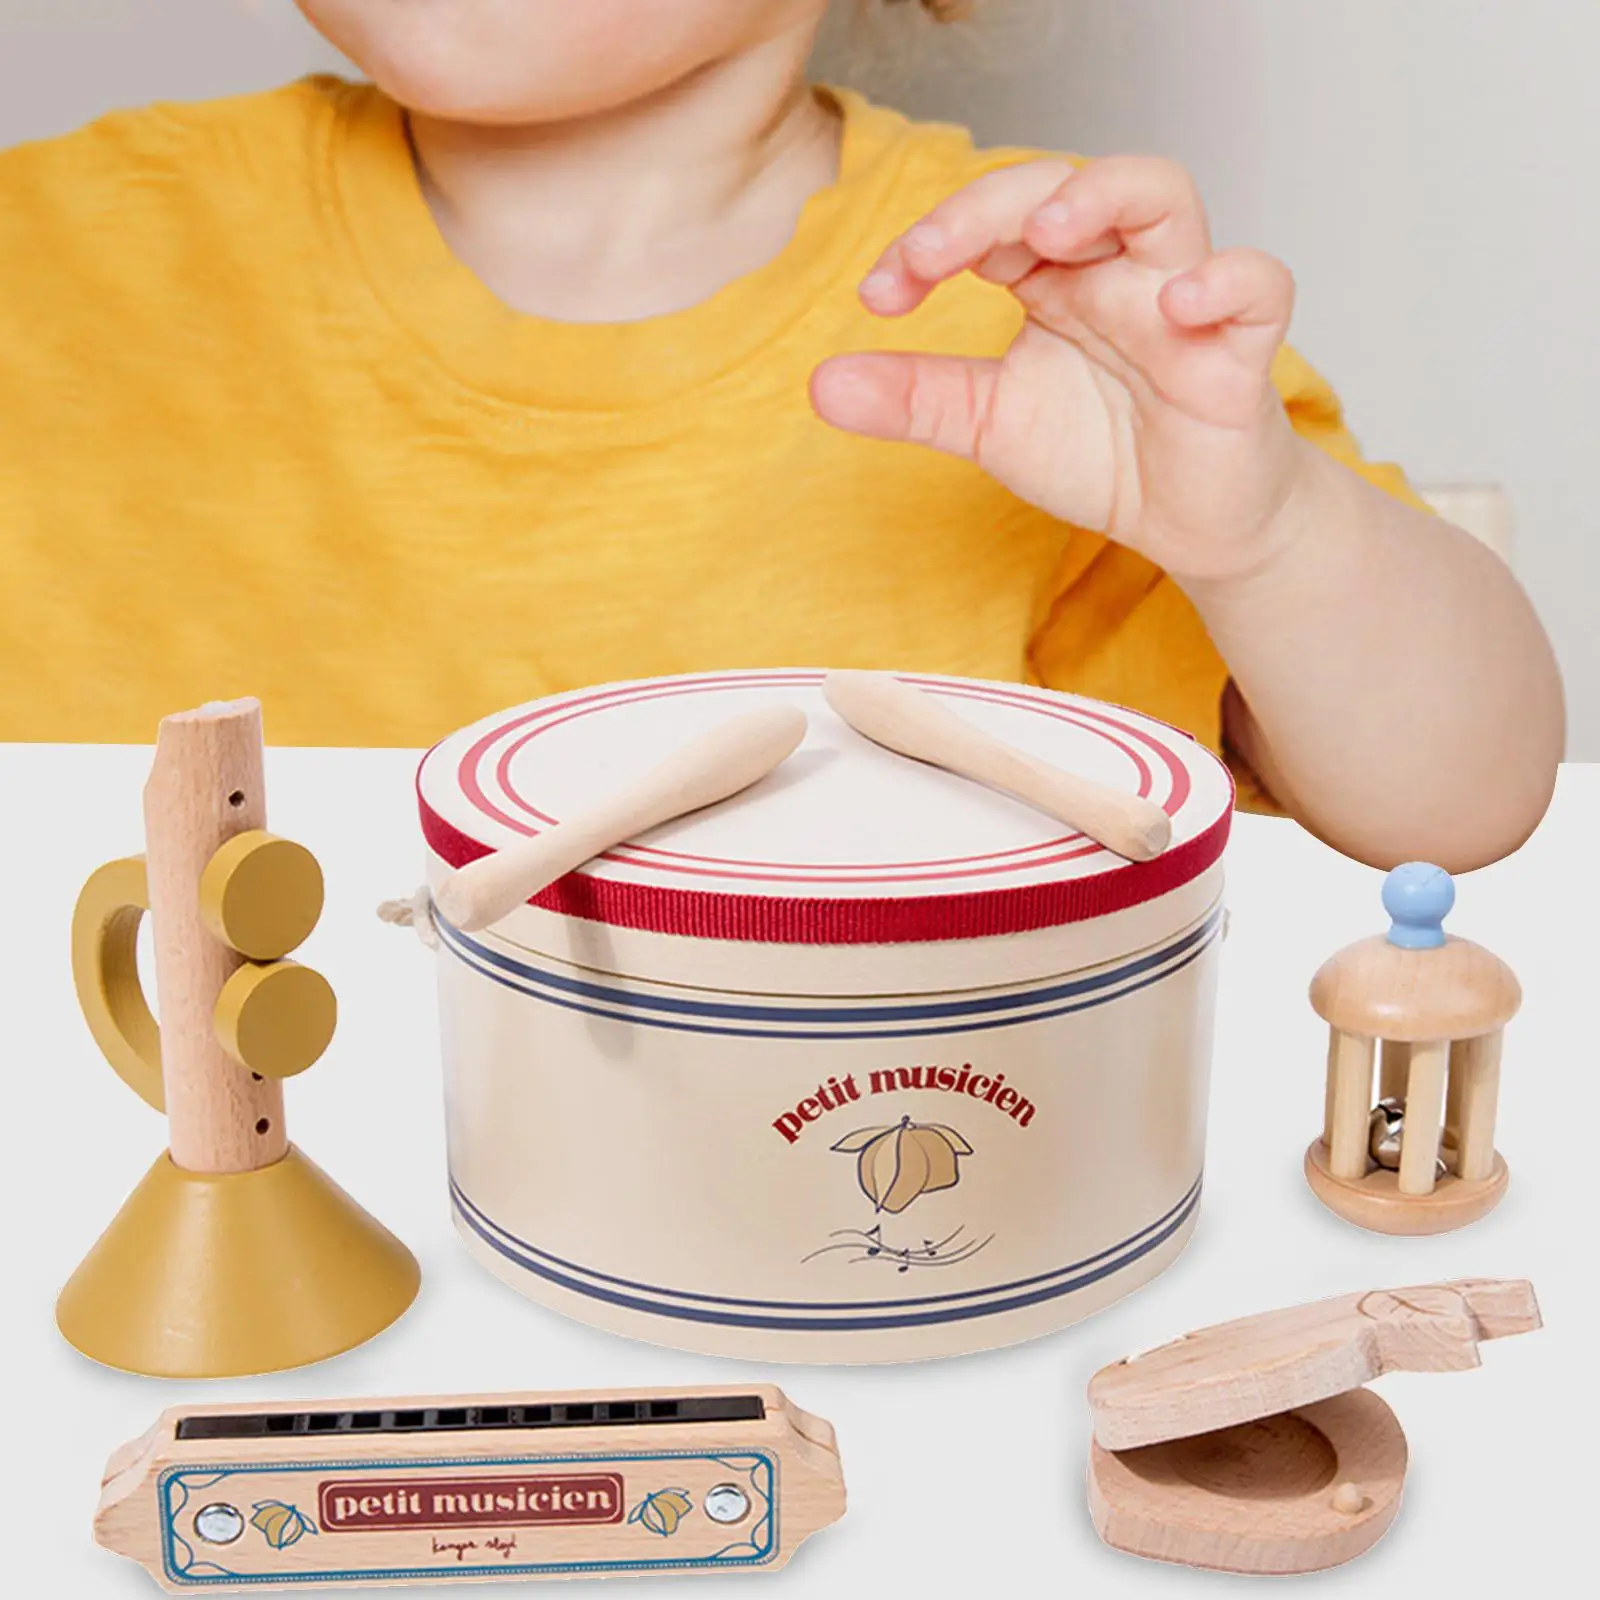 5x Wooden Music Set Portable Baby Musical Instruments Kids Percussion Instrument for Coordination Enlightenment Rhythm Skill